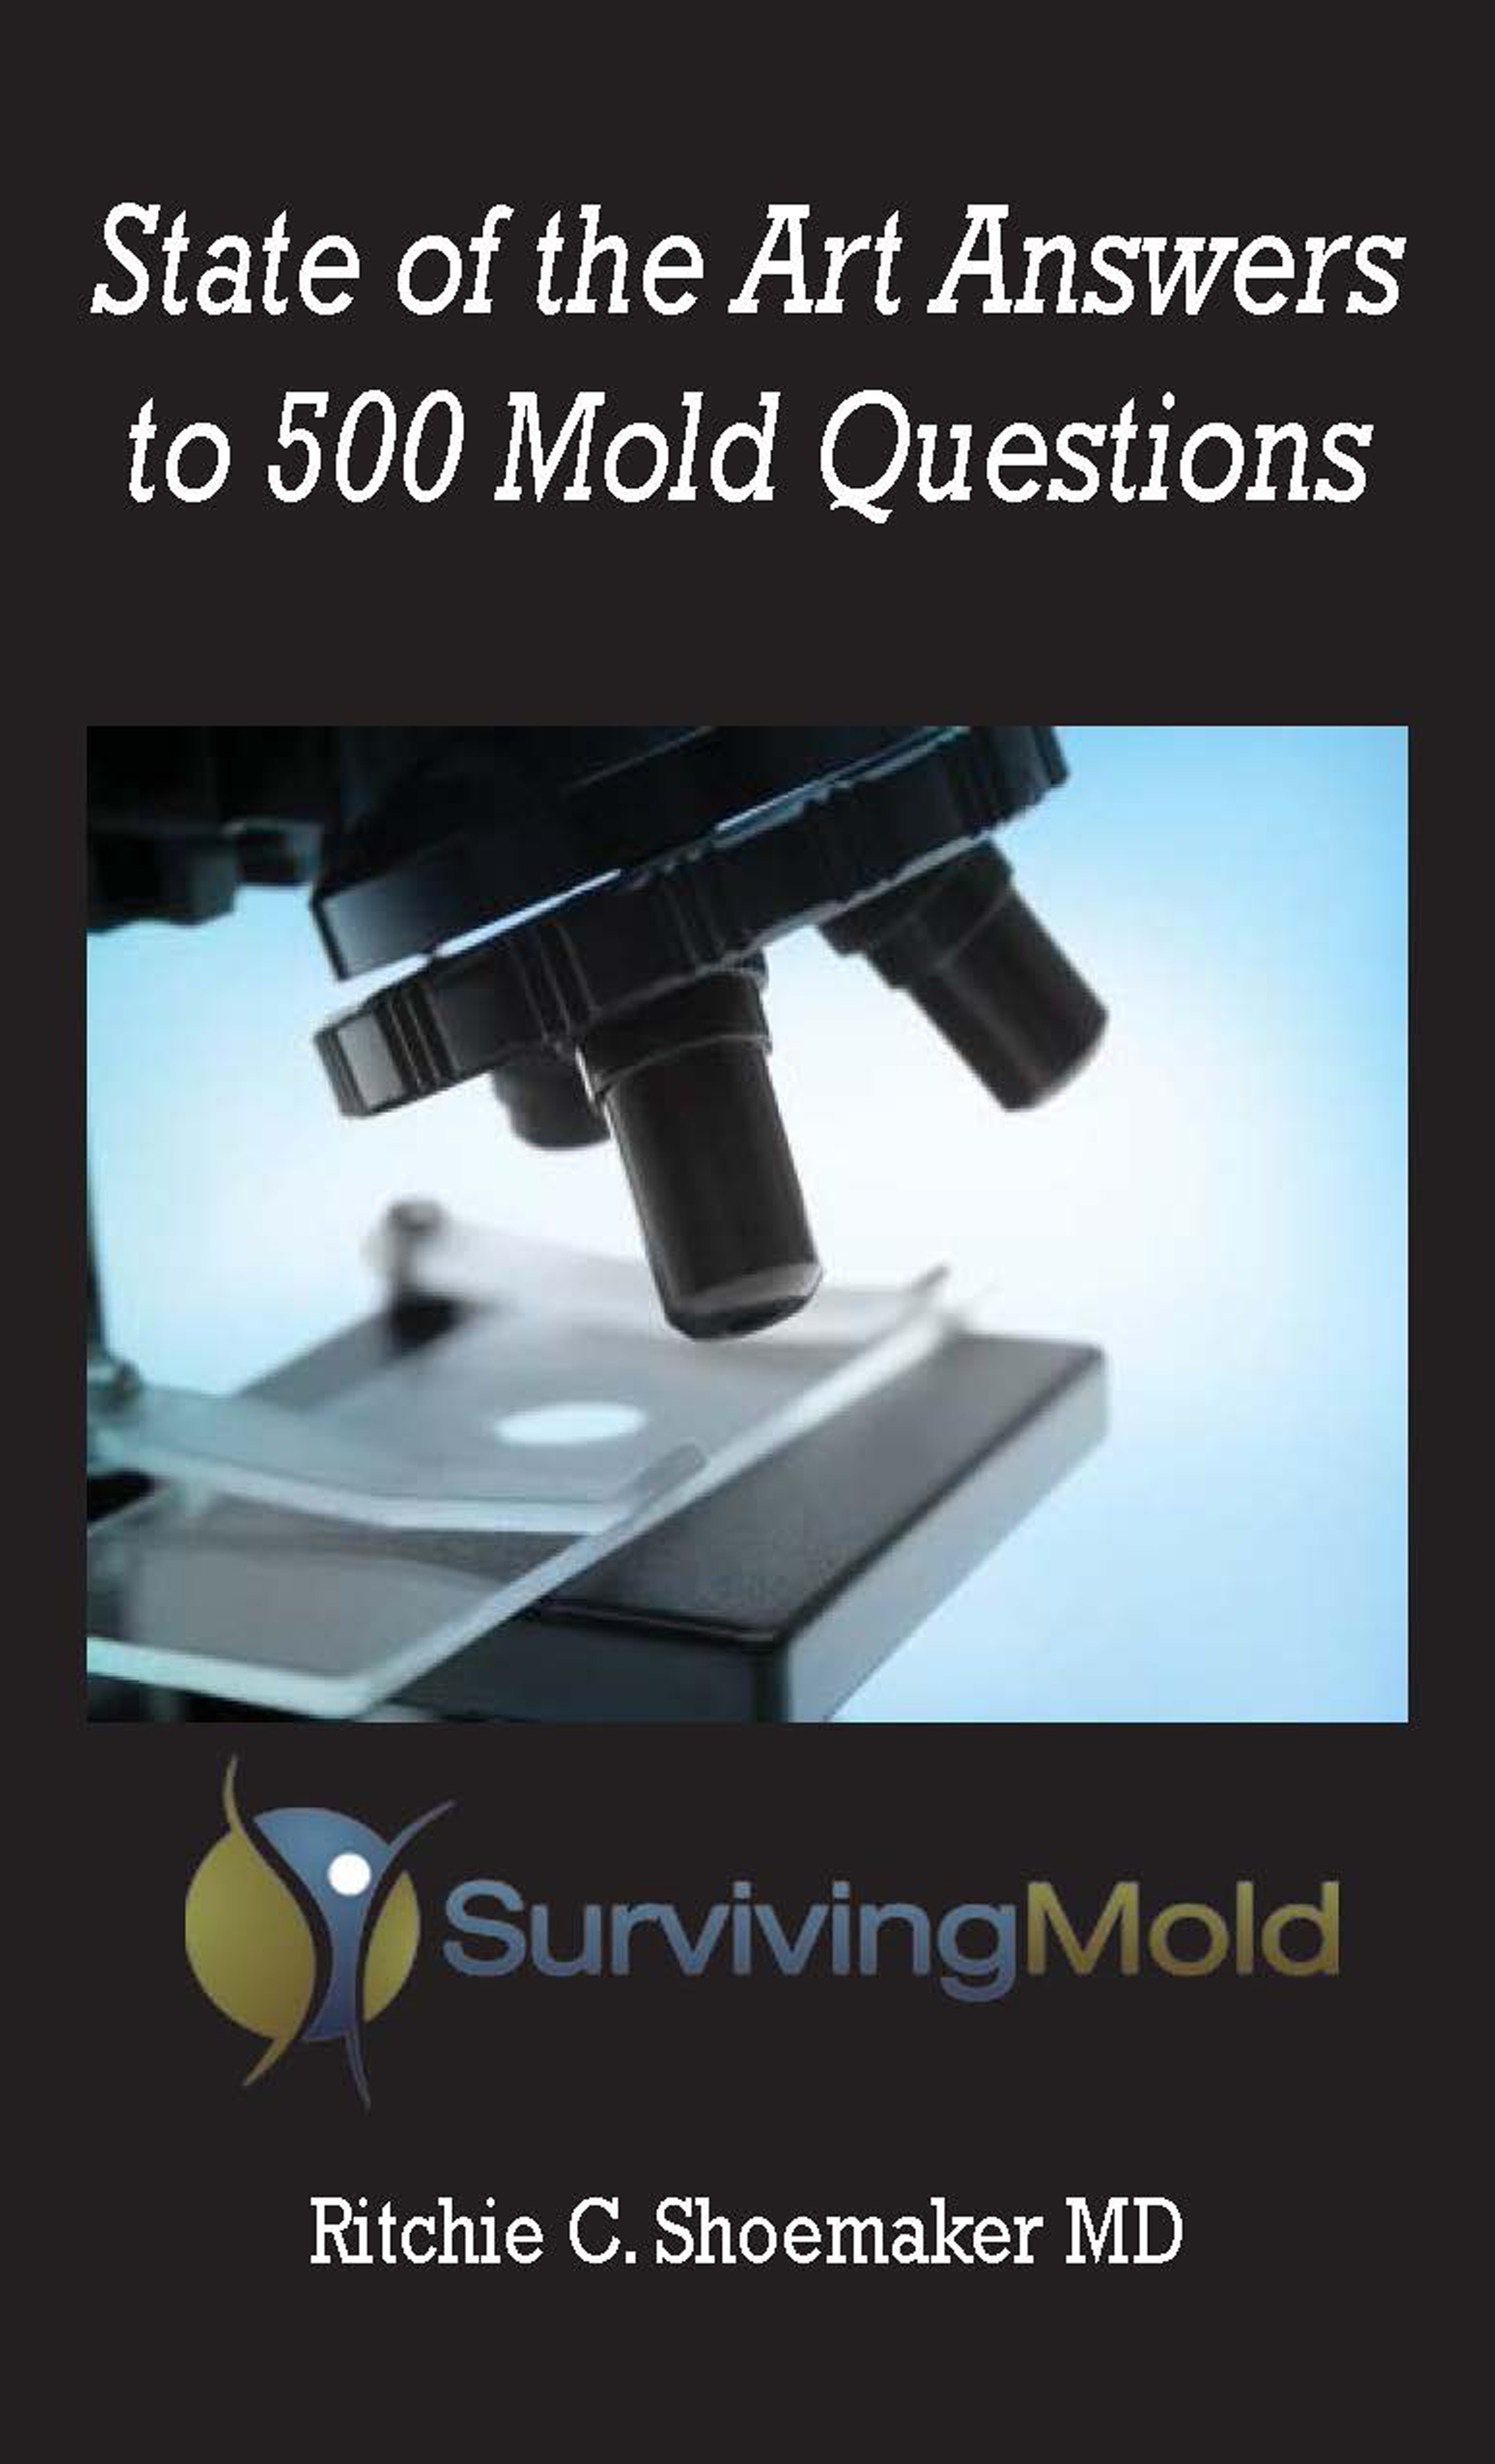 State of the Art Answers to 500 Mold Questions